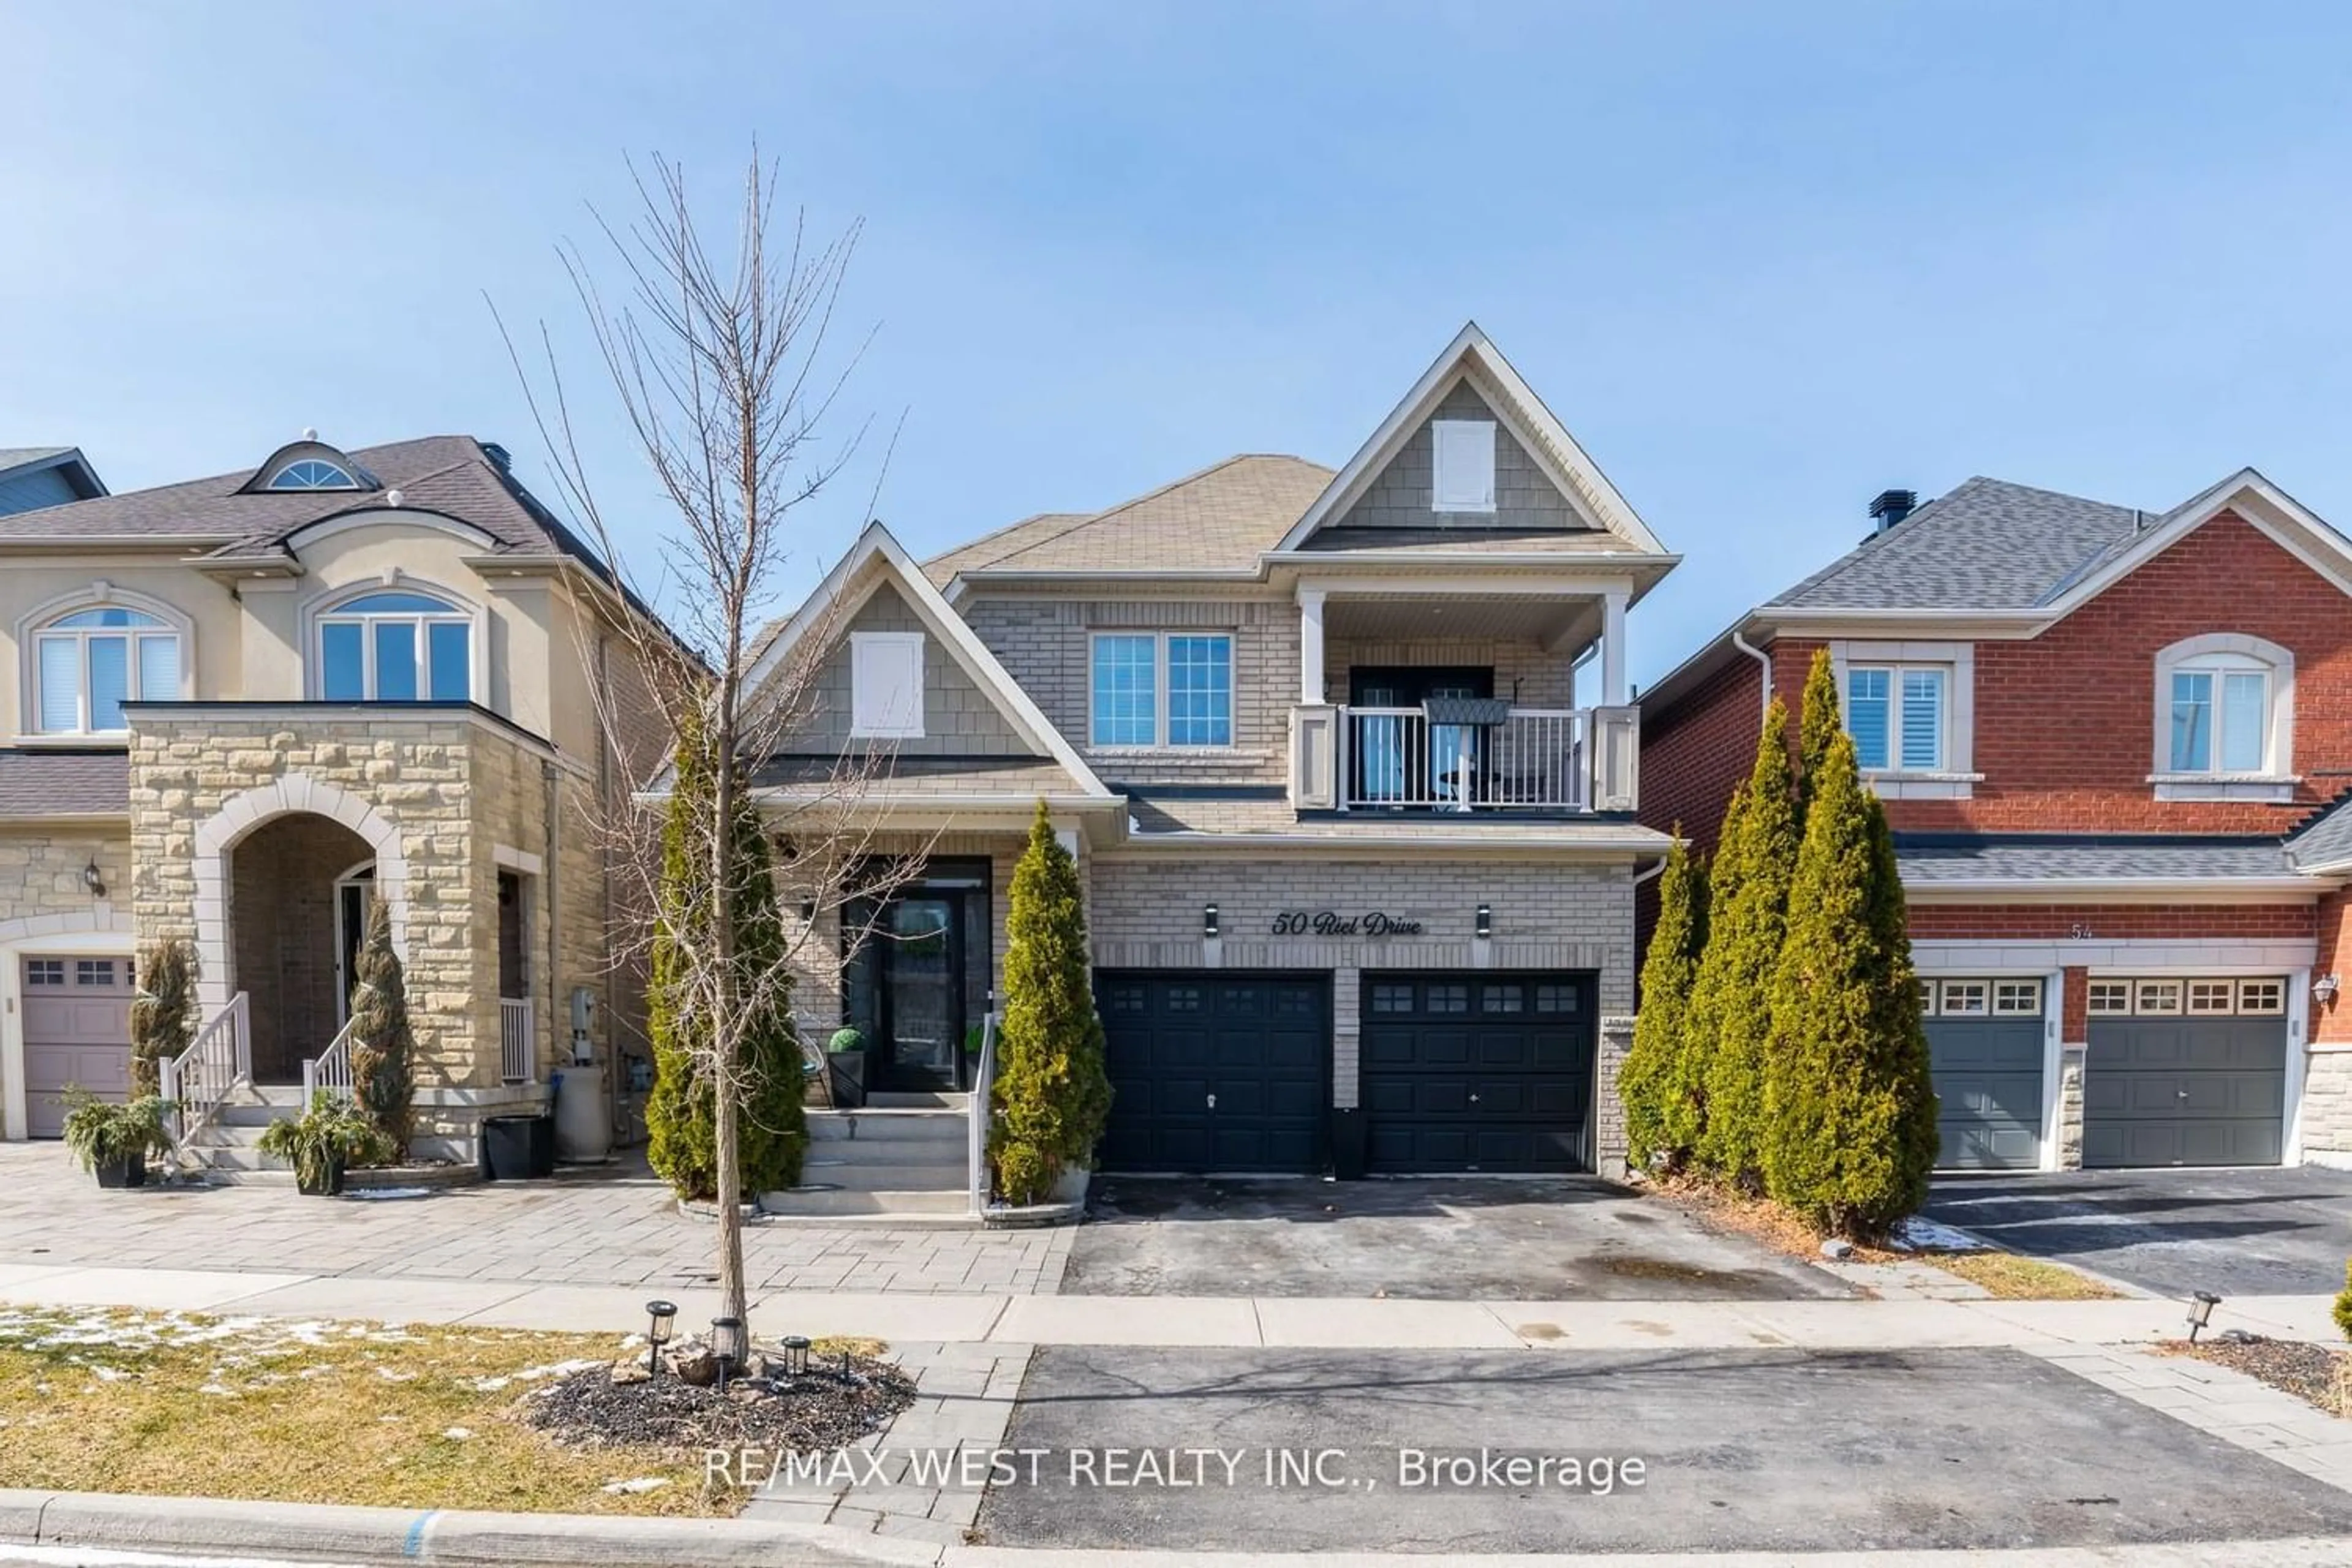 Home with brick exterior material for 50 Riel Dr, Richmond Hill Ontario L4E 4W3